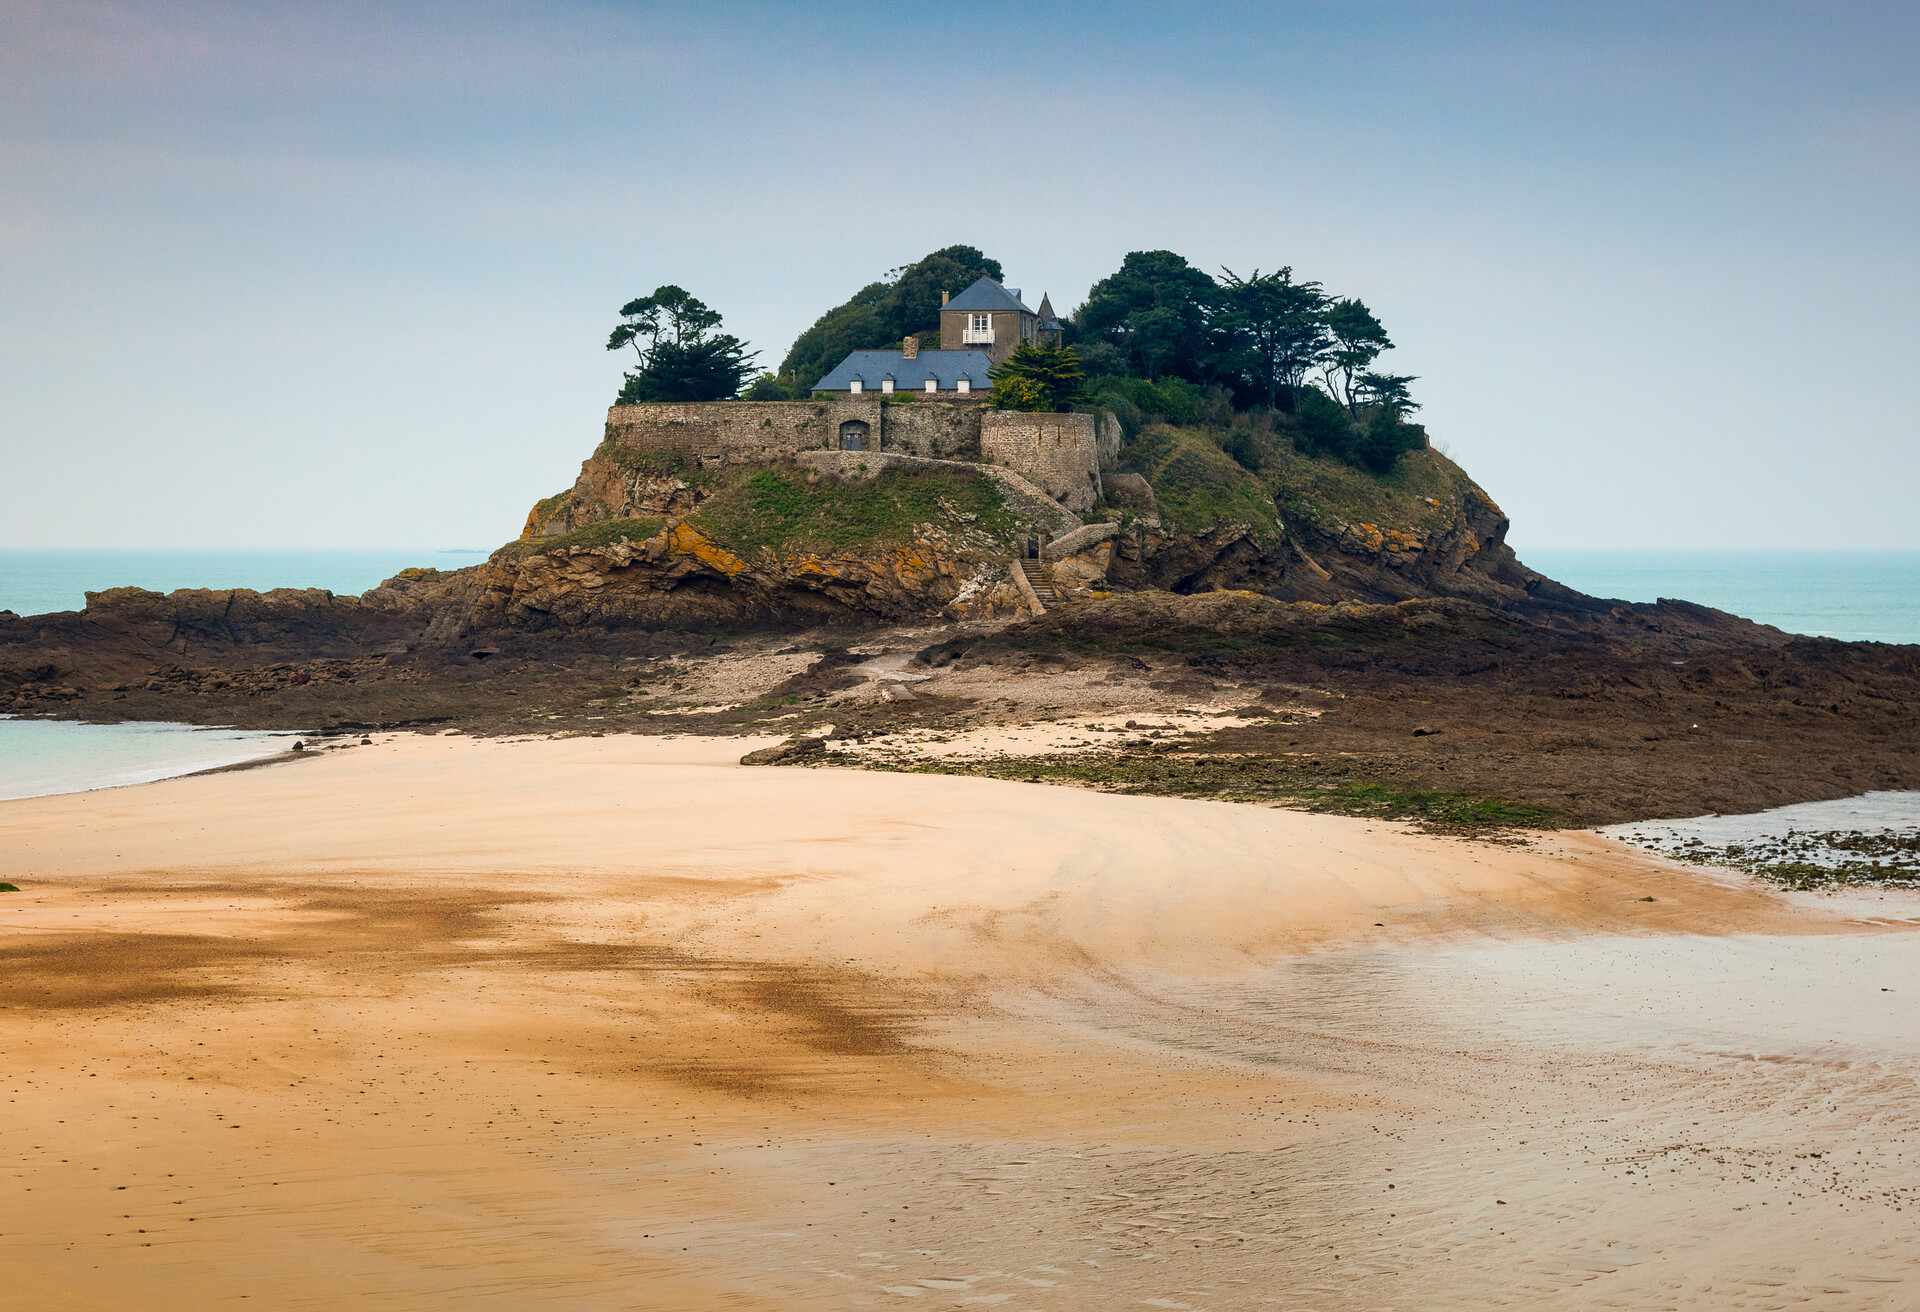 Beach landscape of a private island castle on a secluded beach on the northern emerald coastline of France. / Fort Guesclin Brittany France; Shutterstock ID 224857294